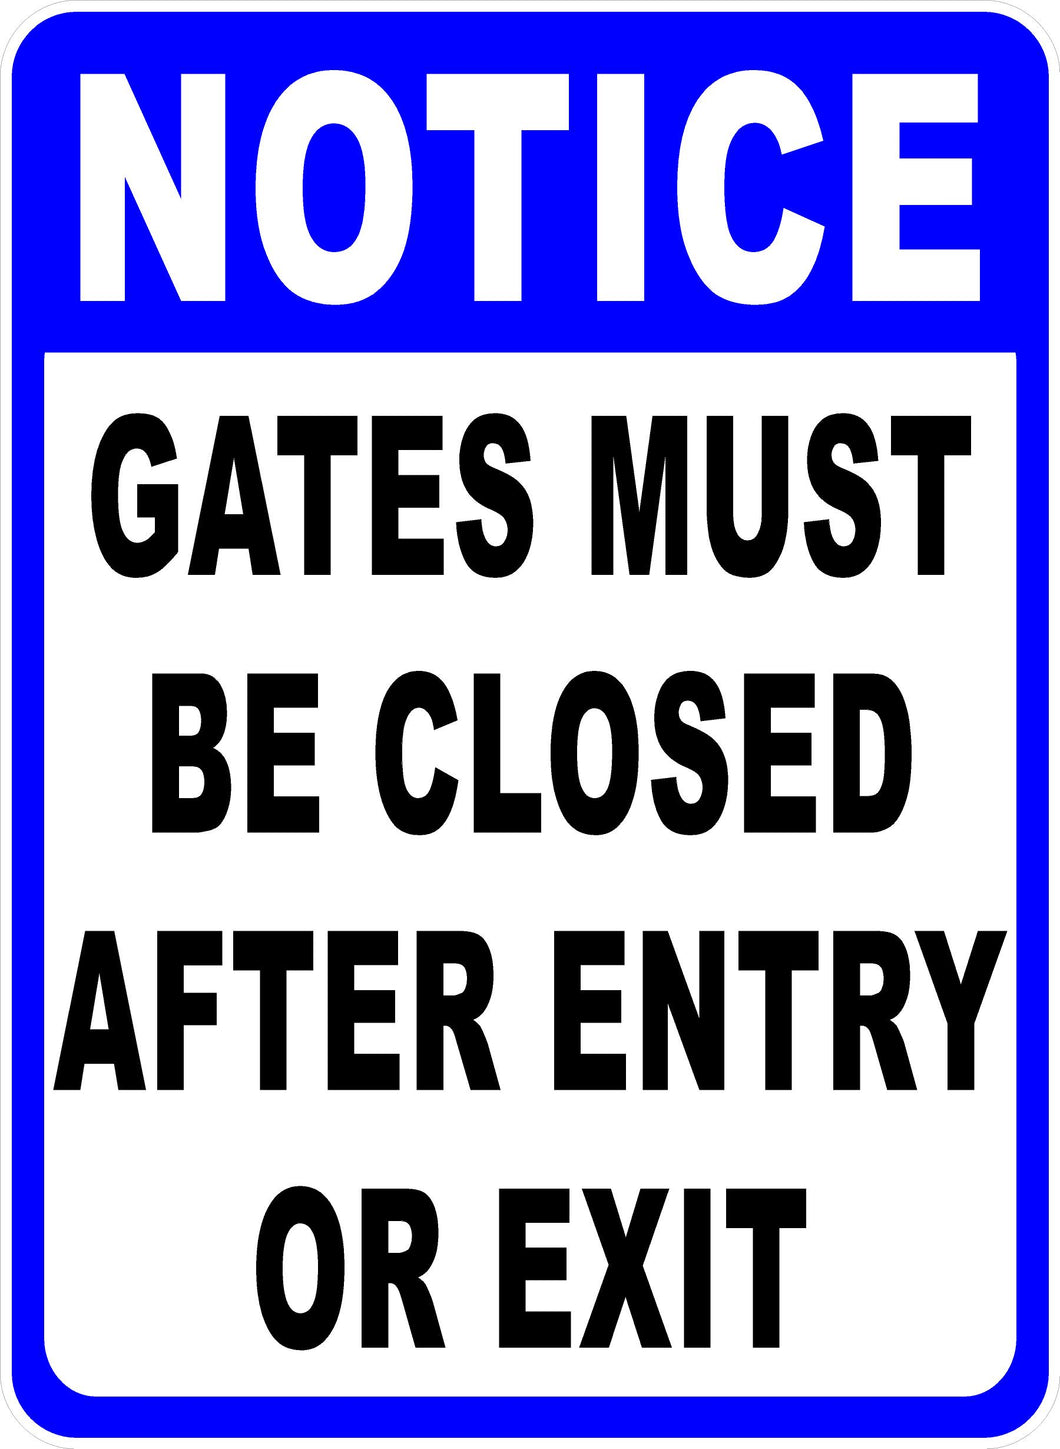 Notice Gate Must Be Closed Sign by Sala Graphics